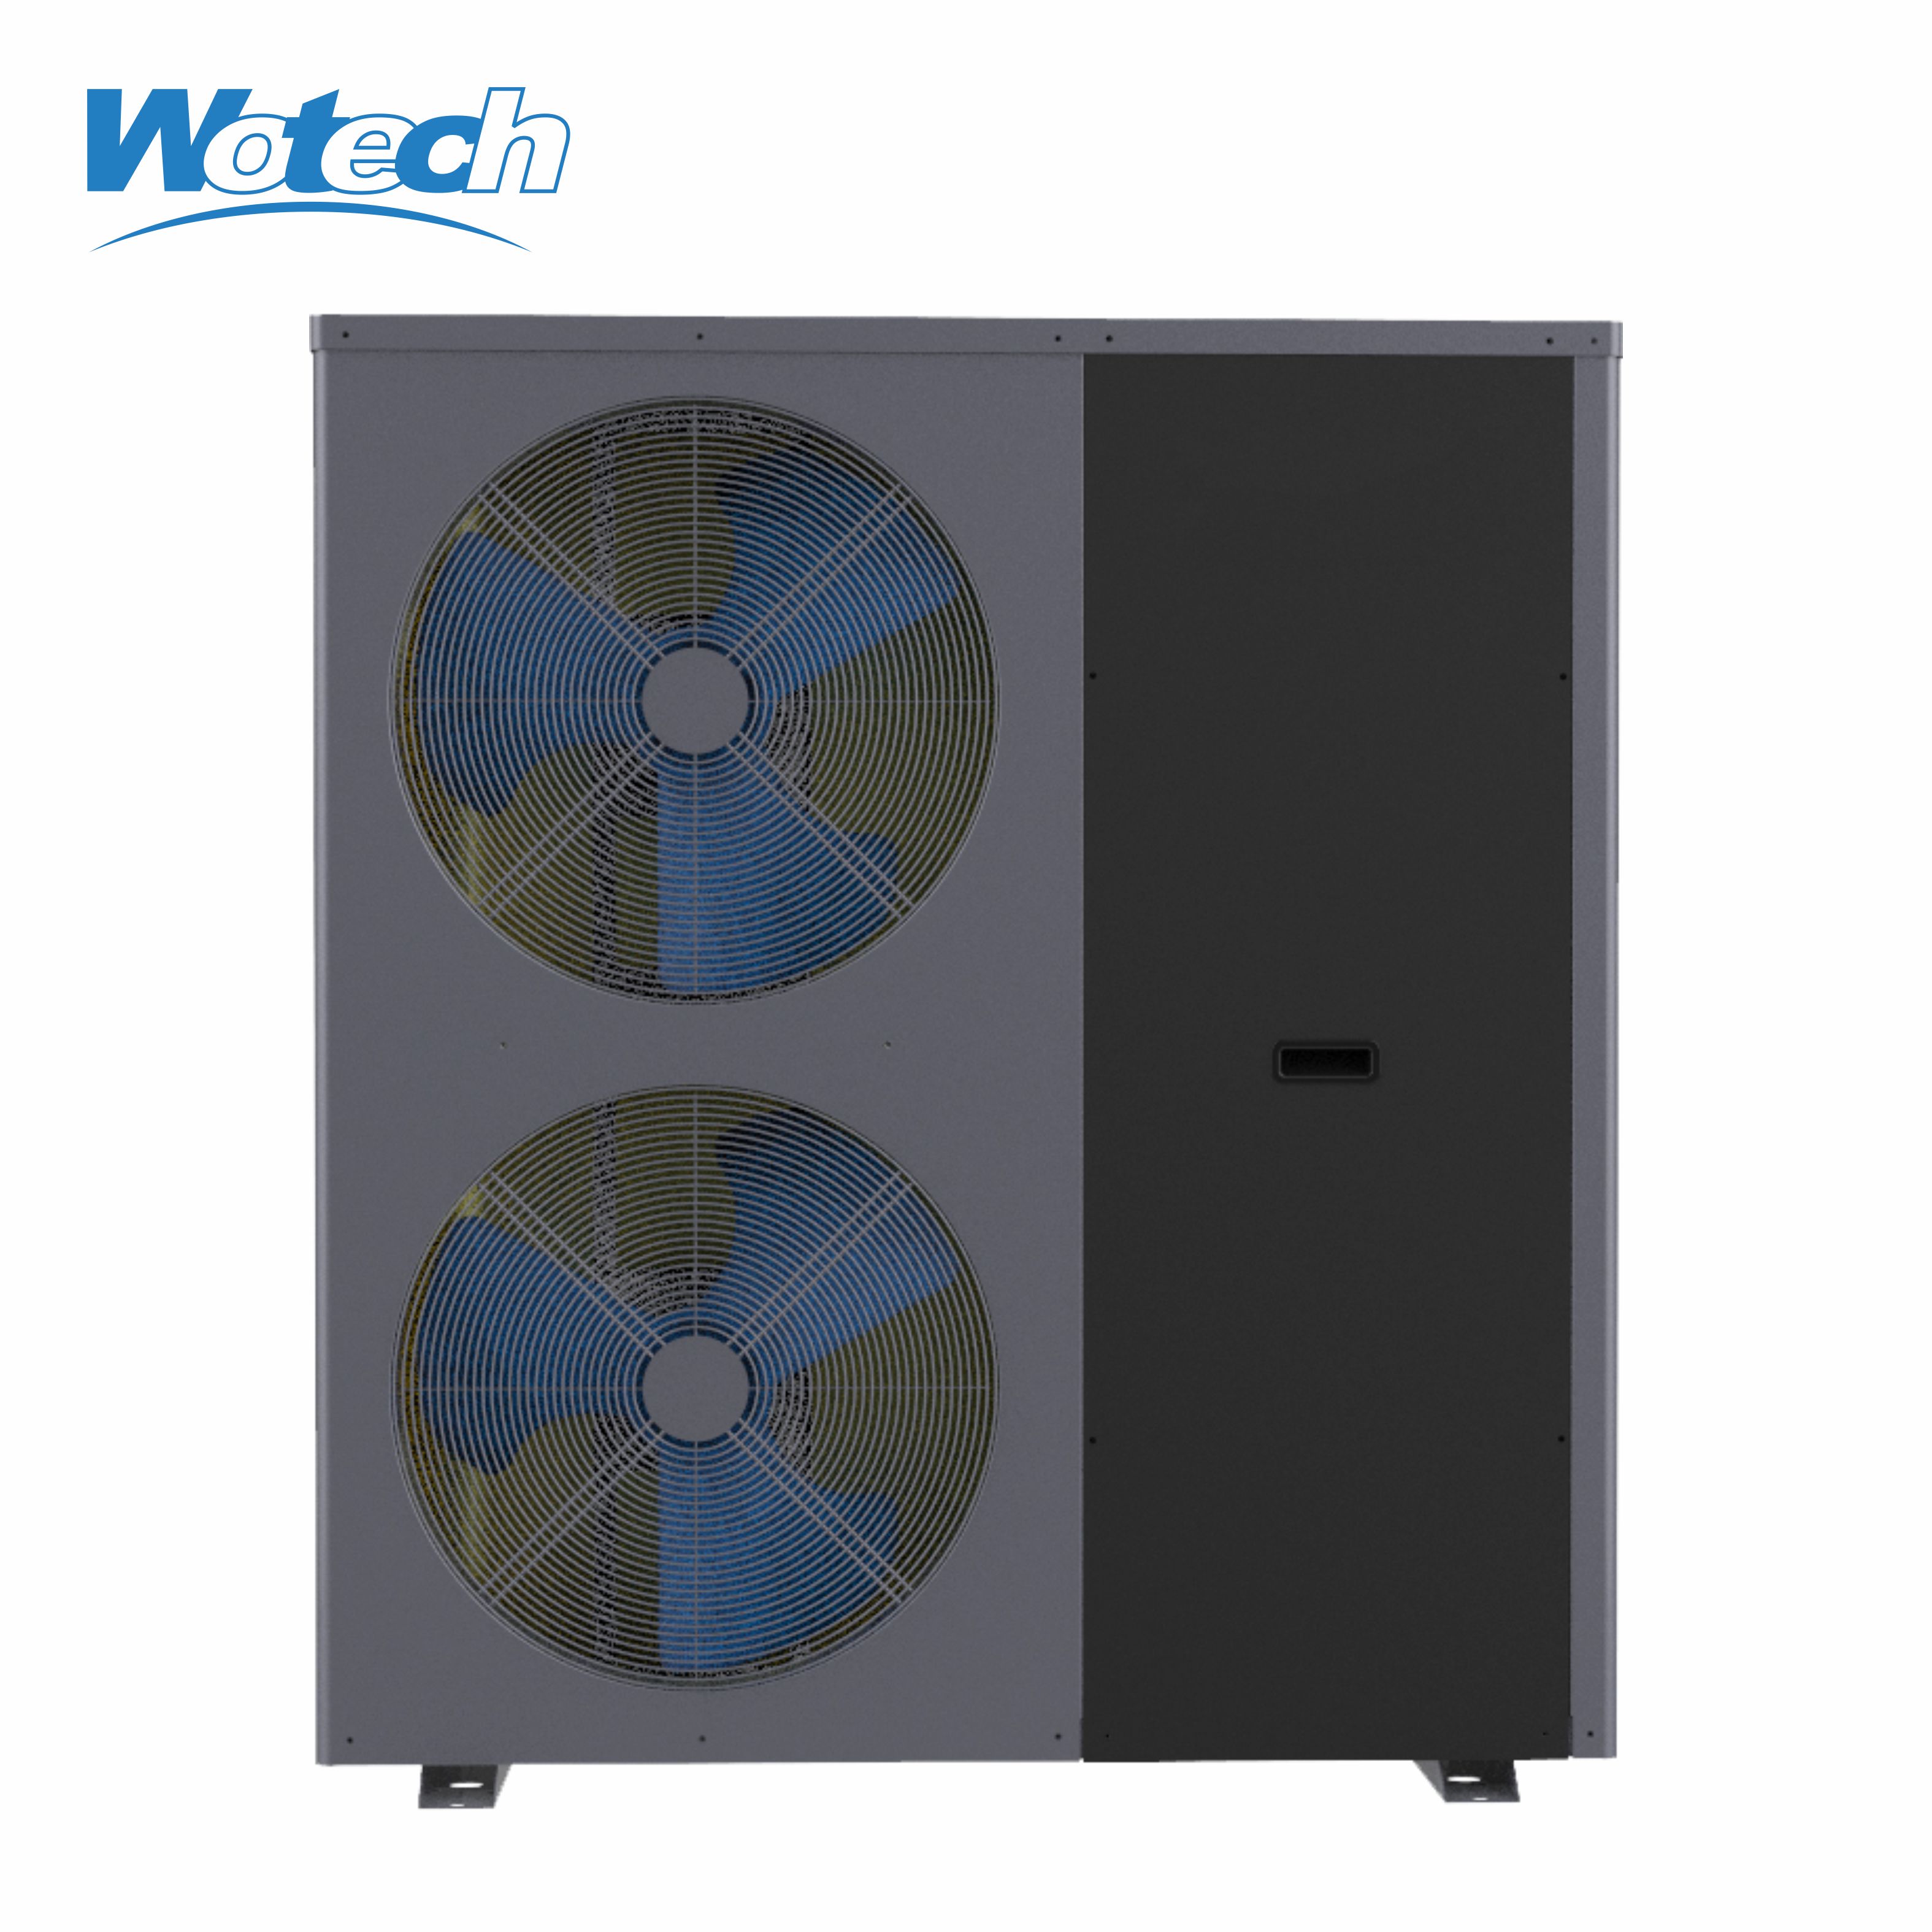 R32 Residentail Air Source Heat Pump with Heating Function